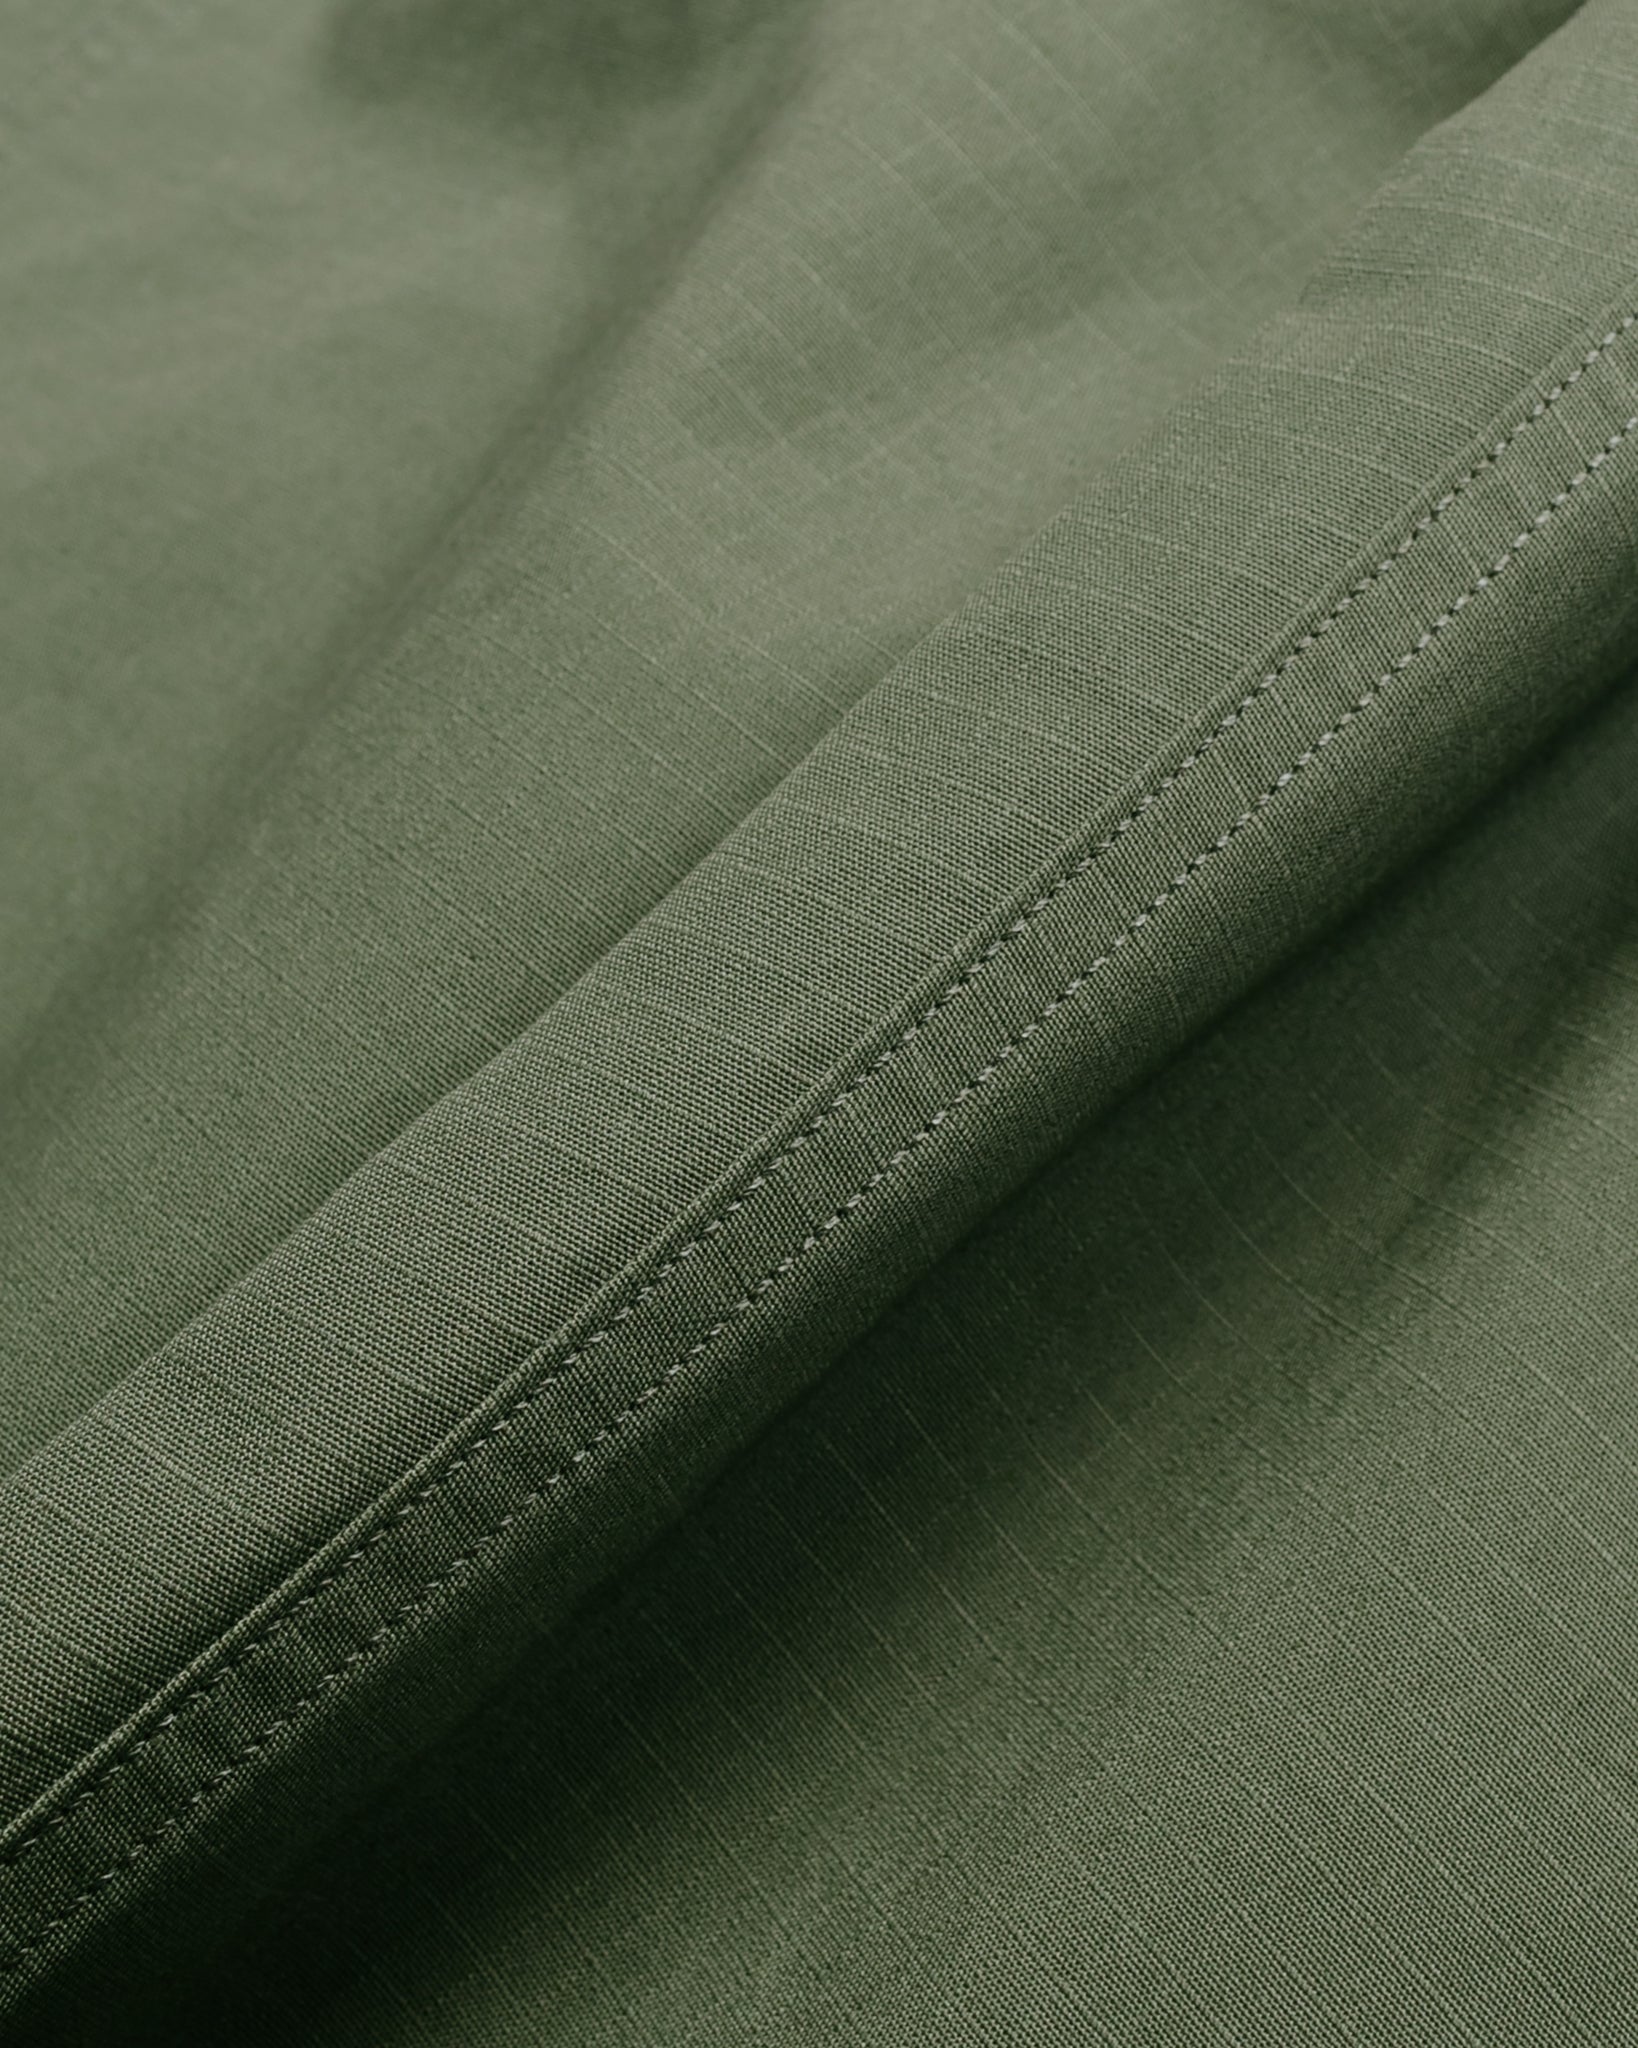 Engineered Garments Fatigue Pant Olive Cotton Ripstop fabric